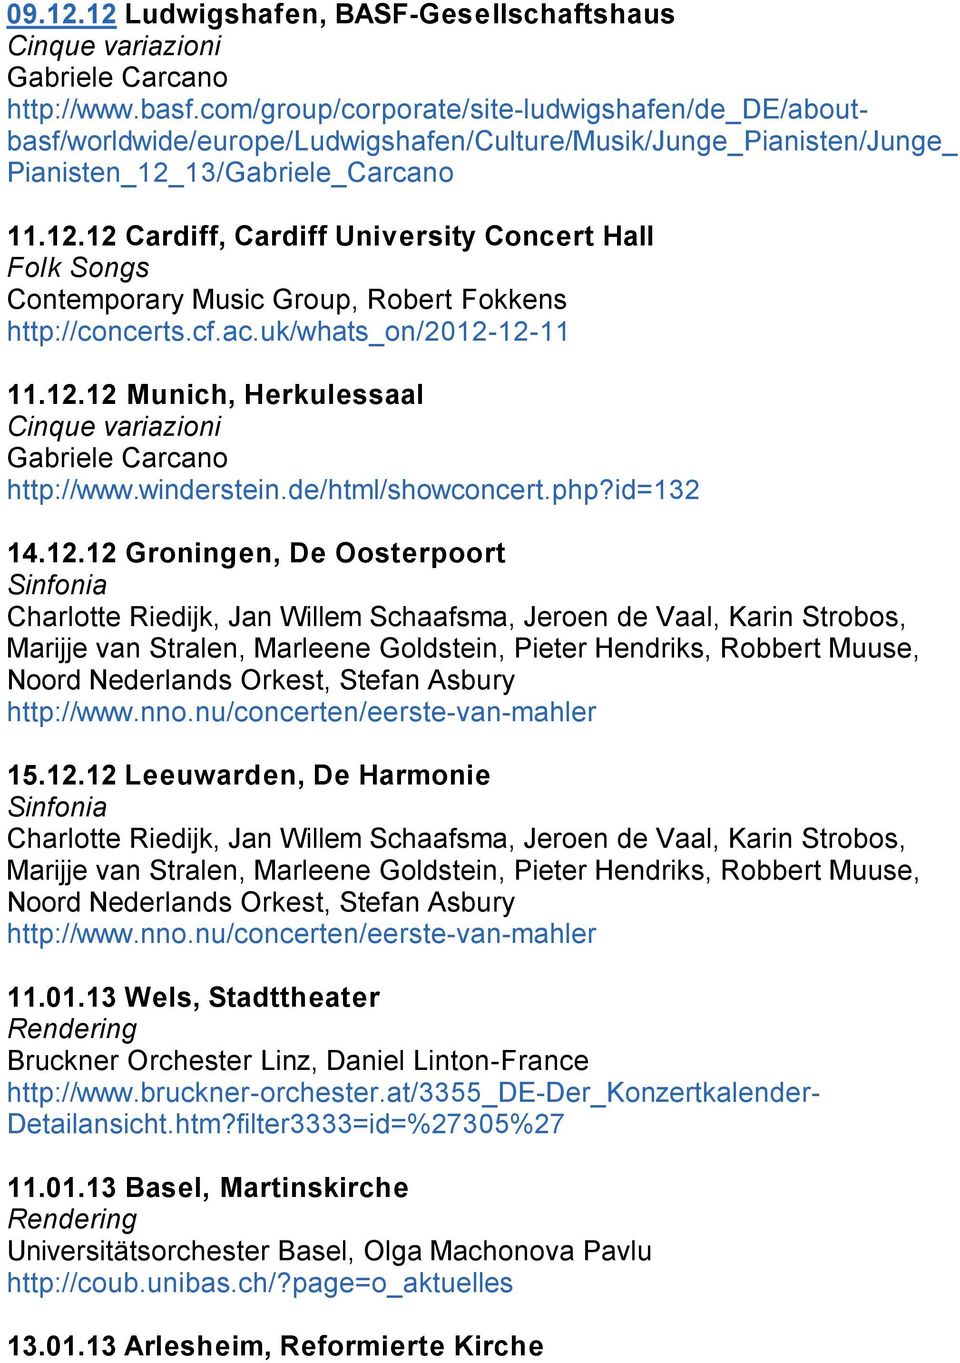 13/Gabriele_Carcano 11.12.12 Cardiff, Cardiff University Concert Hall Folk Songs Contemporary Music Group, Robert Fokkens http://concerts.cf.ac.uk/whats_on/2012-12-11 11.12.12 Munich, Herkulessaal Cinque variazioni Gabriele Carcano http://www.